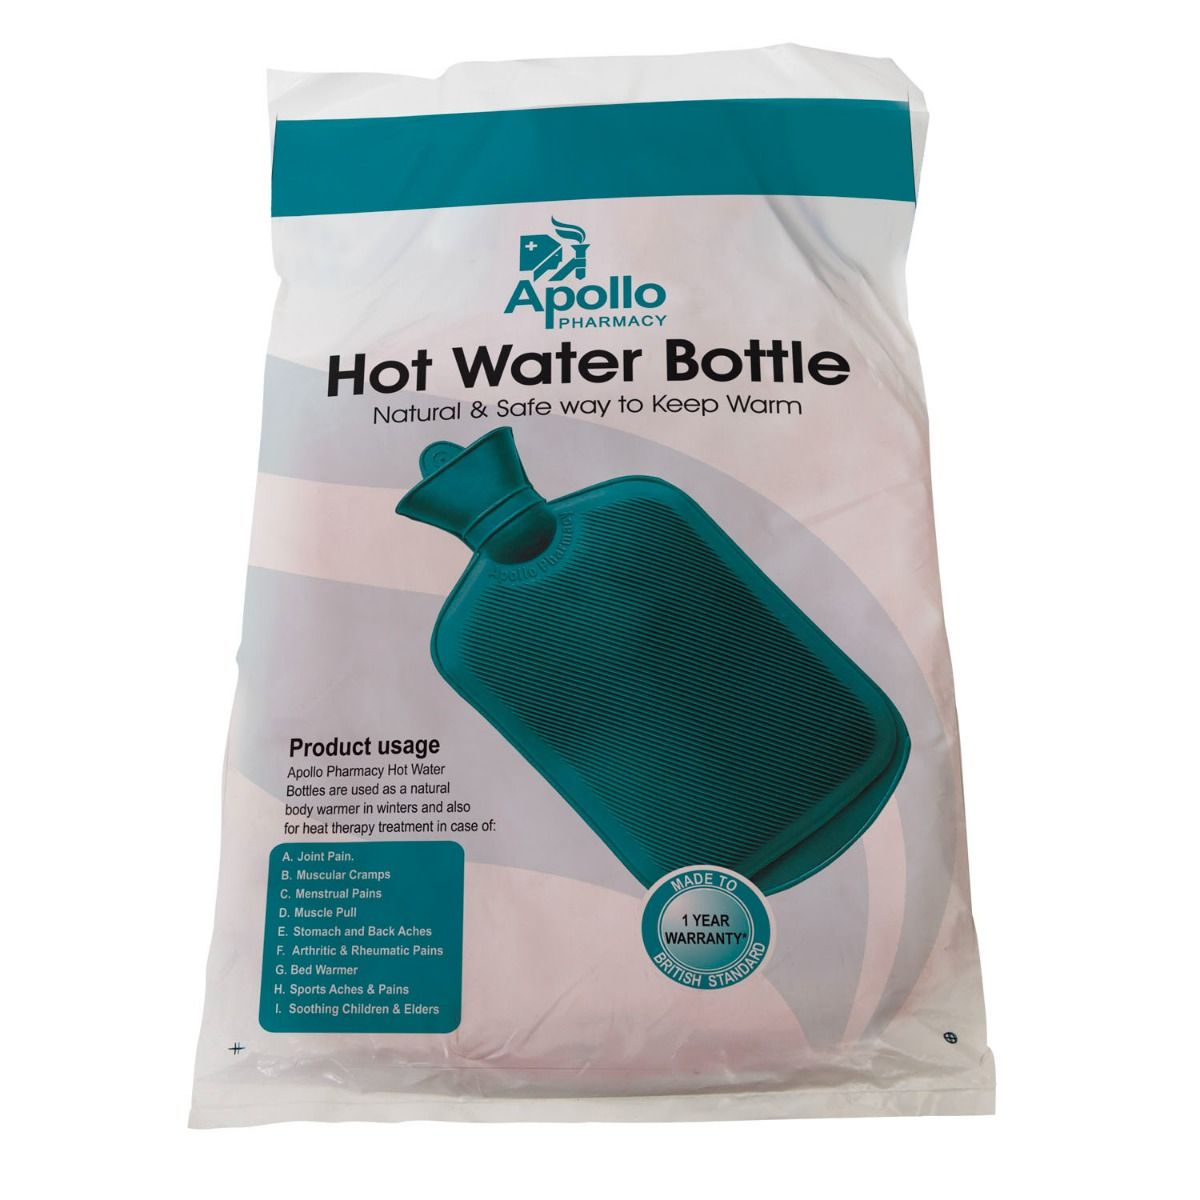 Apollo Pharmacy Hot Water Bottle 2.2 Litre, 1 Count Price, Uses